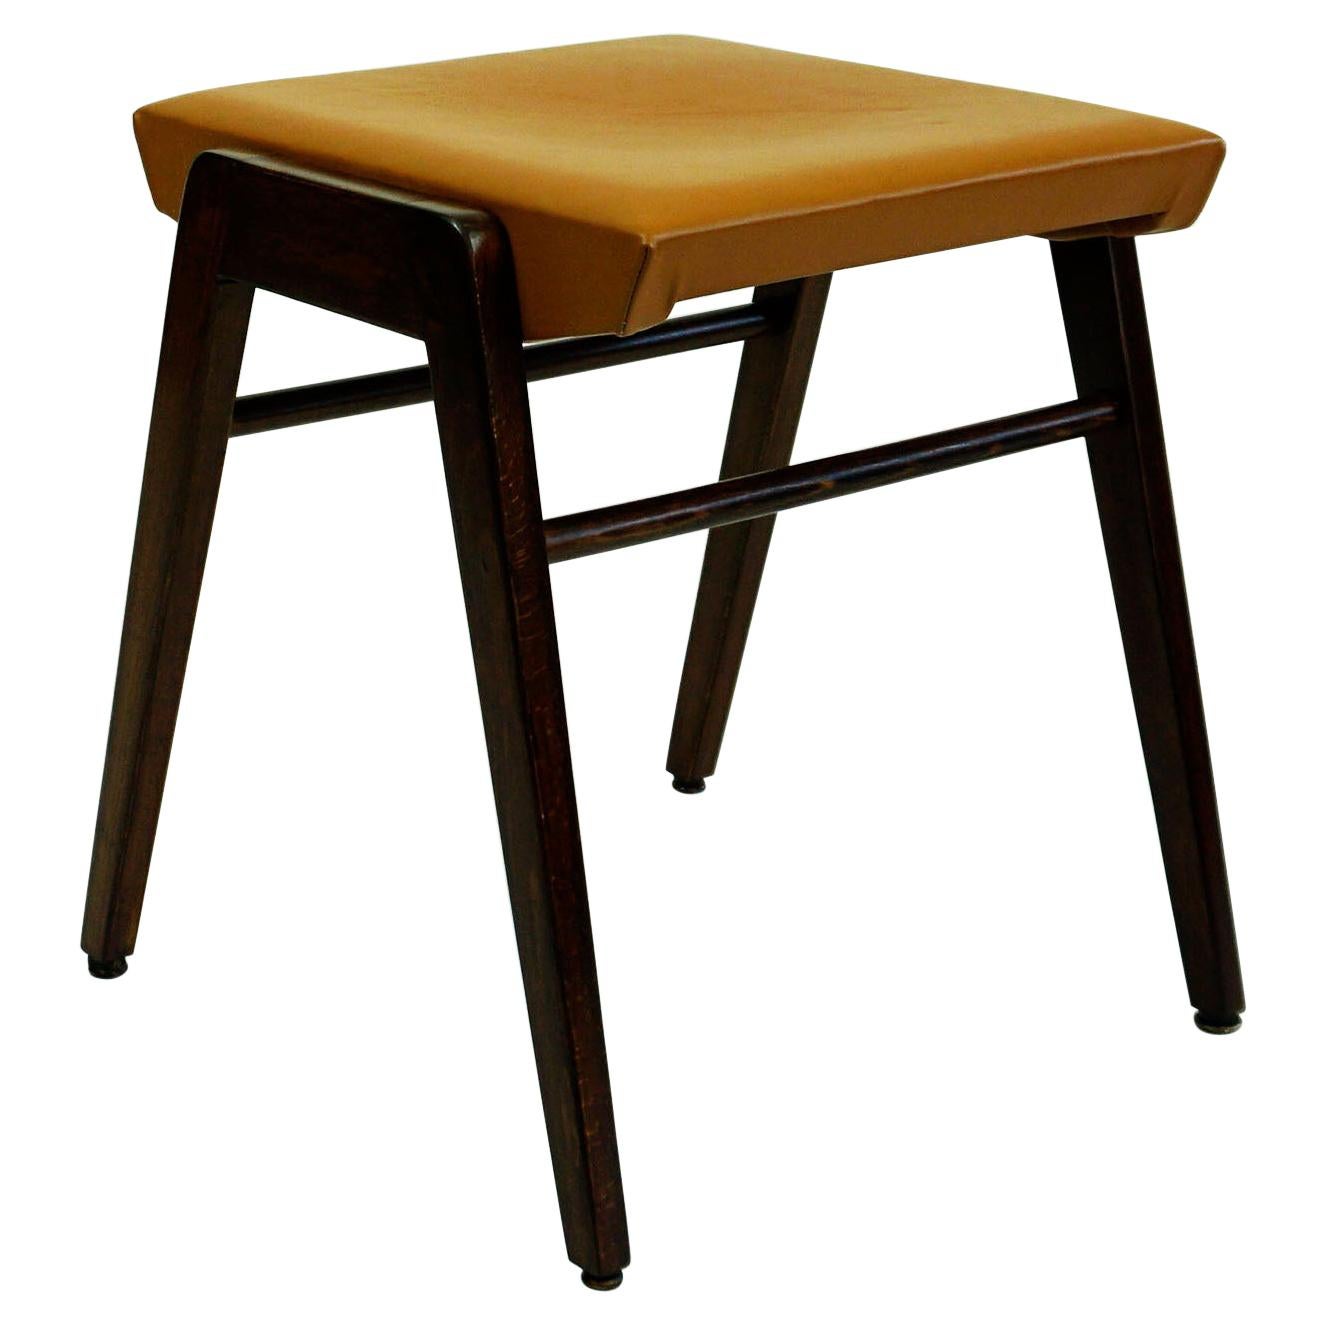 Austrian Midcentury Beech and Cognac Brown Leather Stool by Franz Schuster